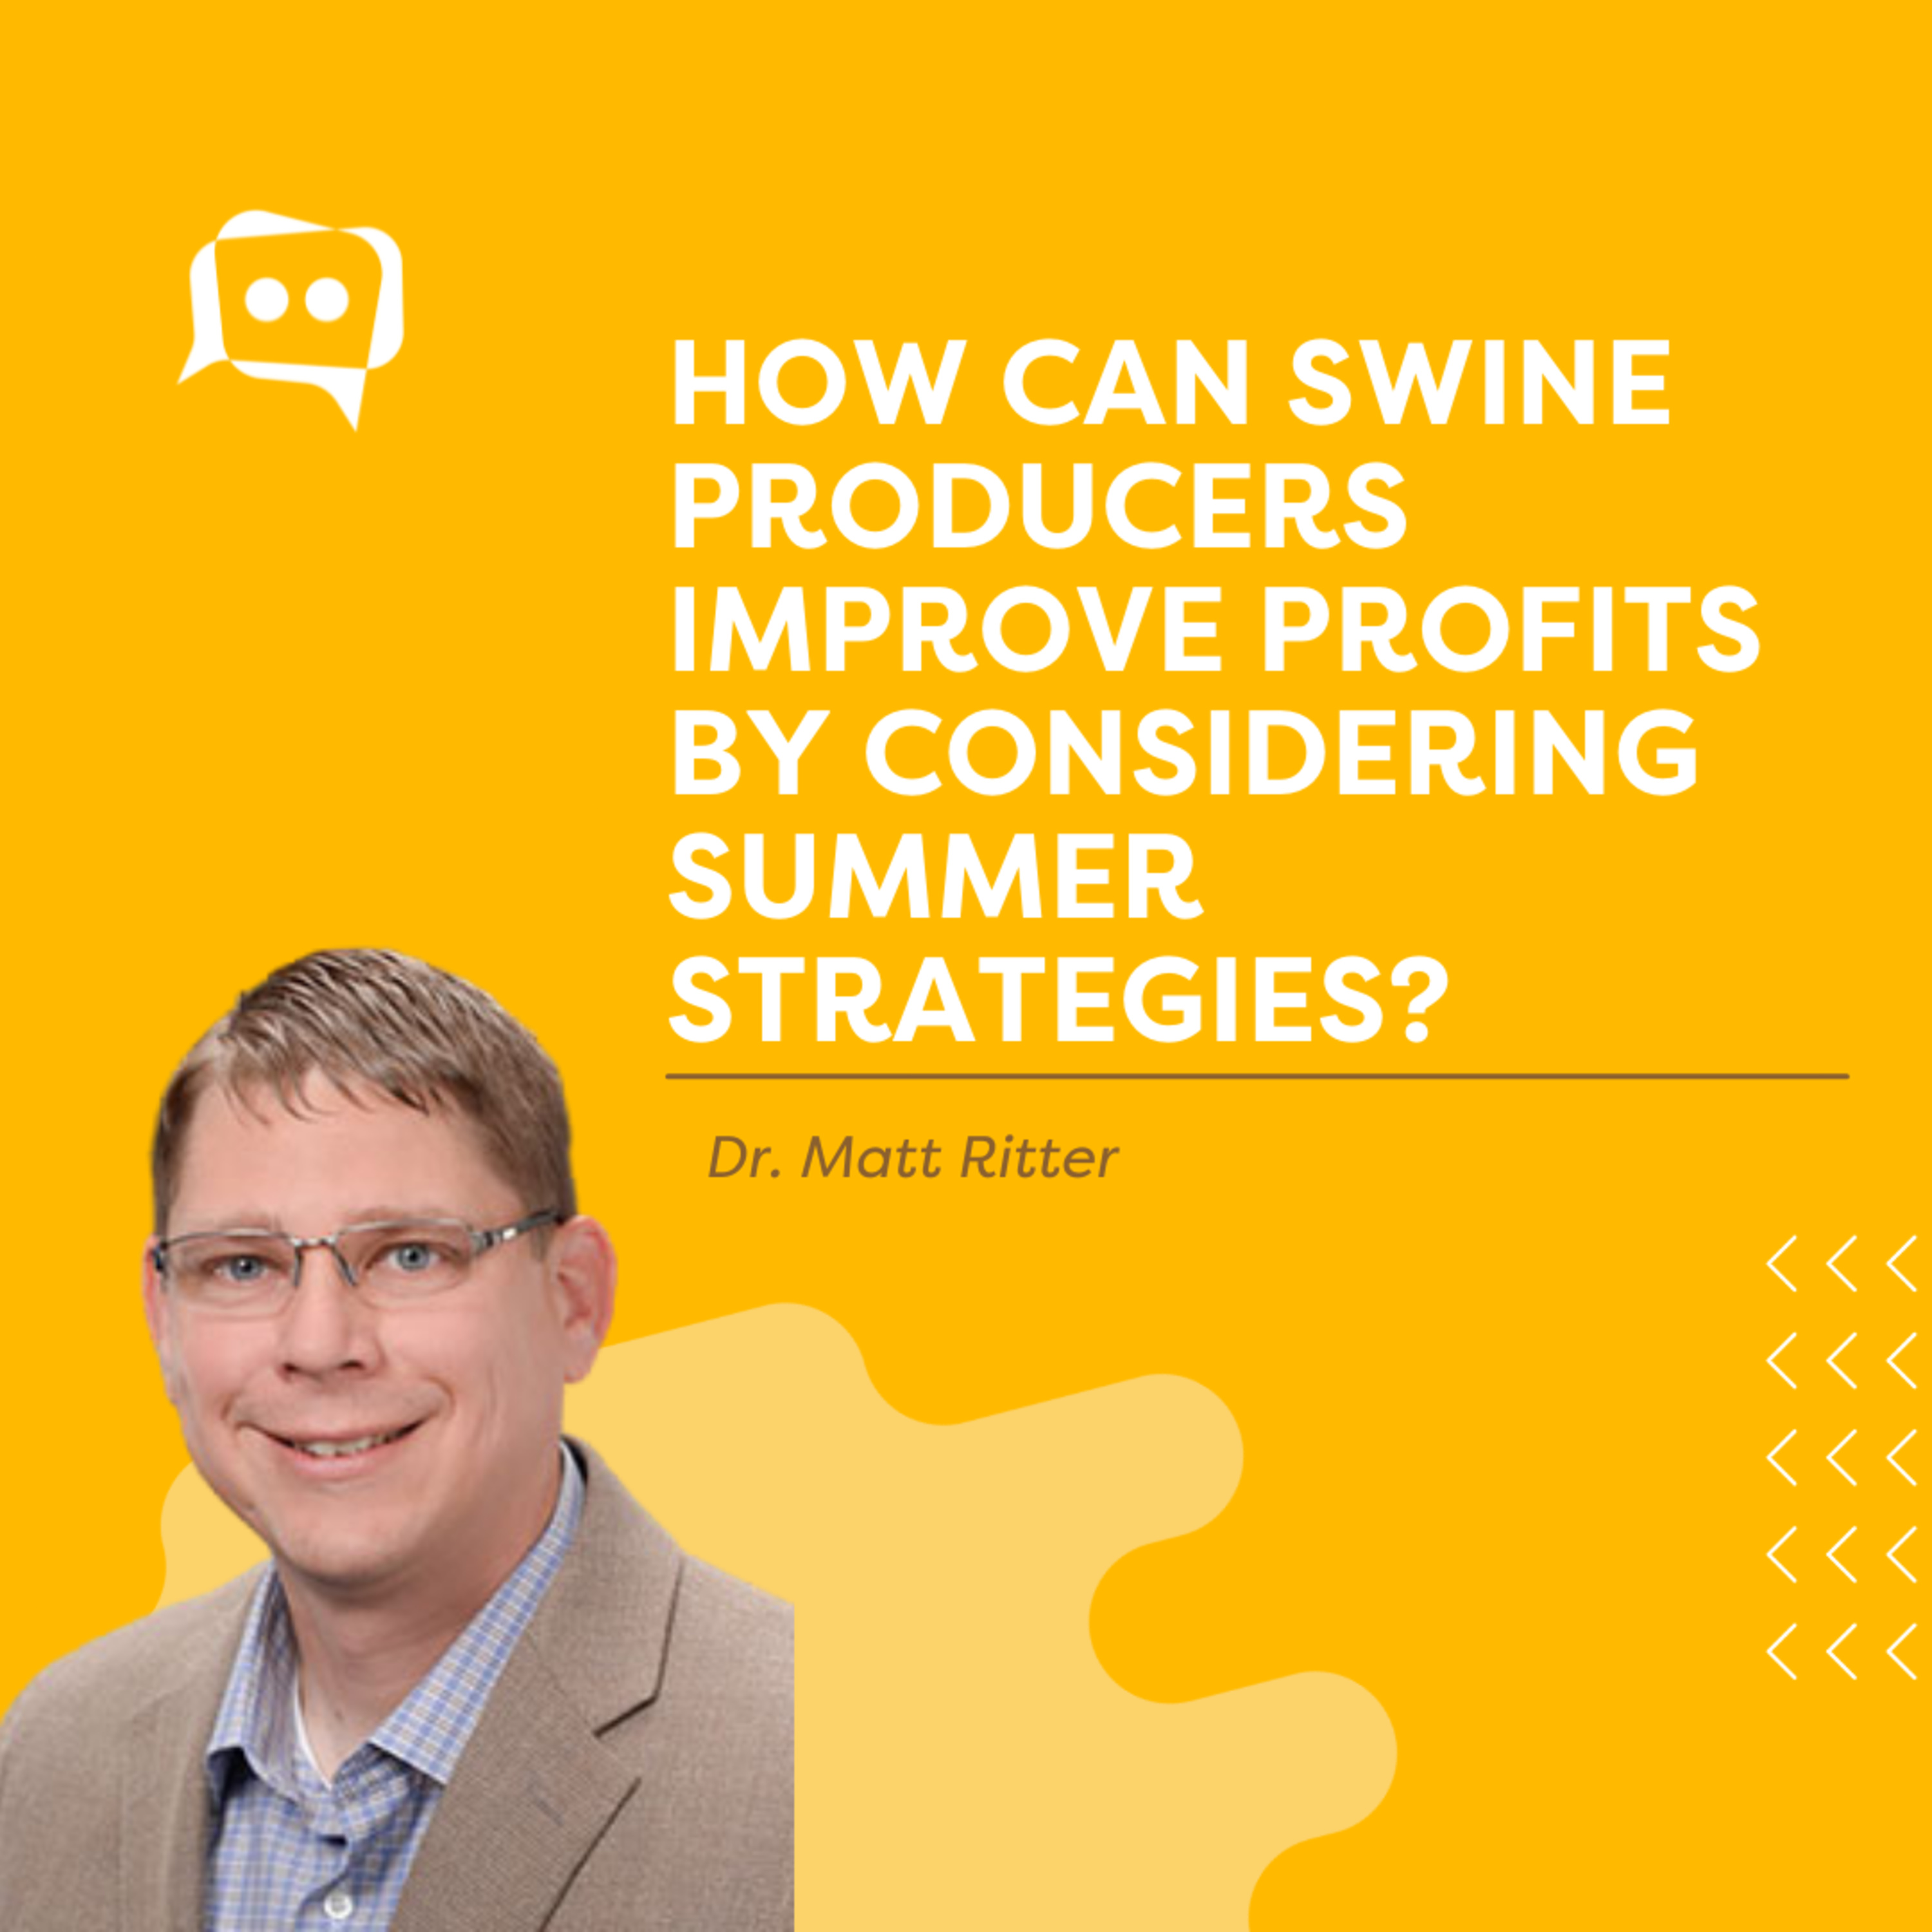 #SHORTS: How can swine producers improve profits by considering summer strategies? With Dr. Matt Ritter